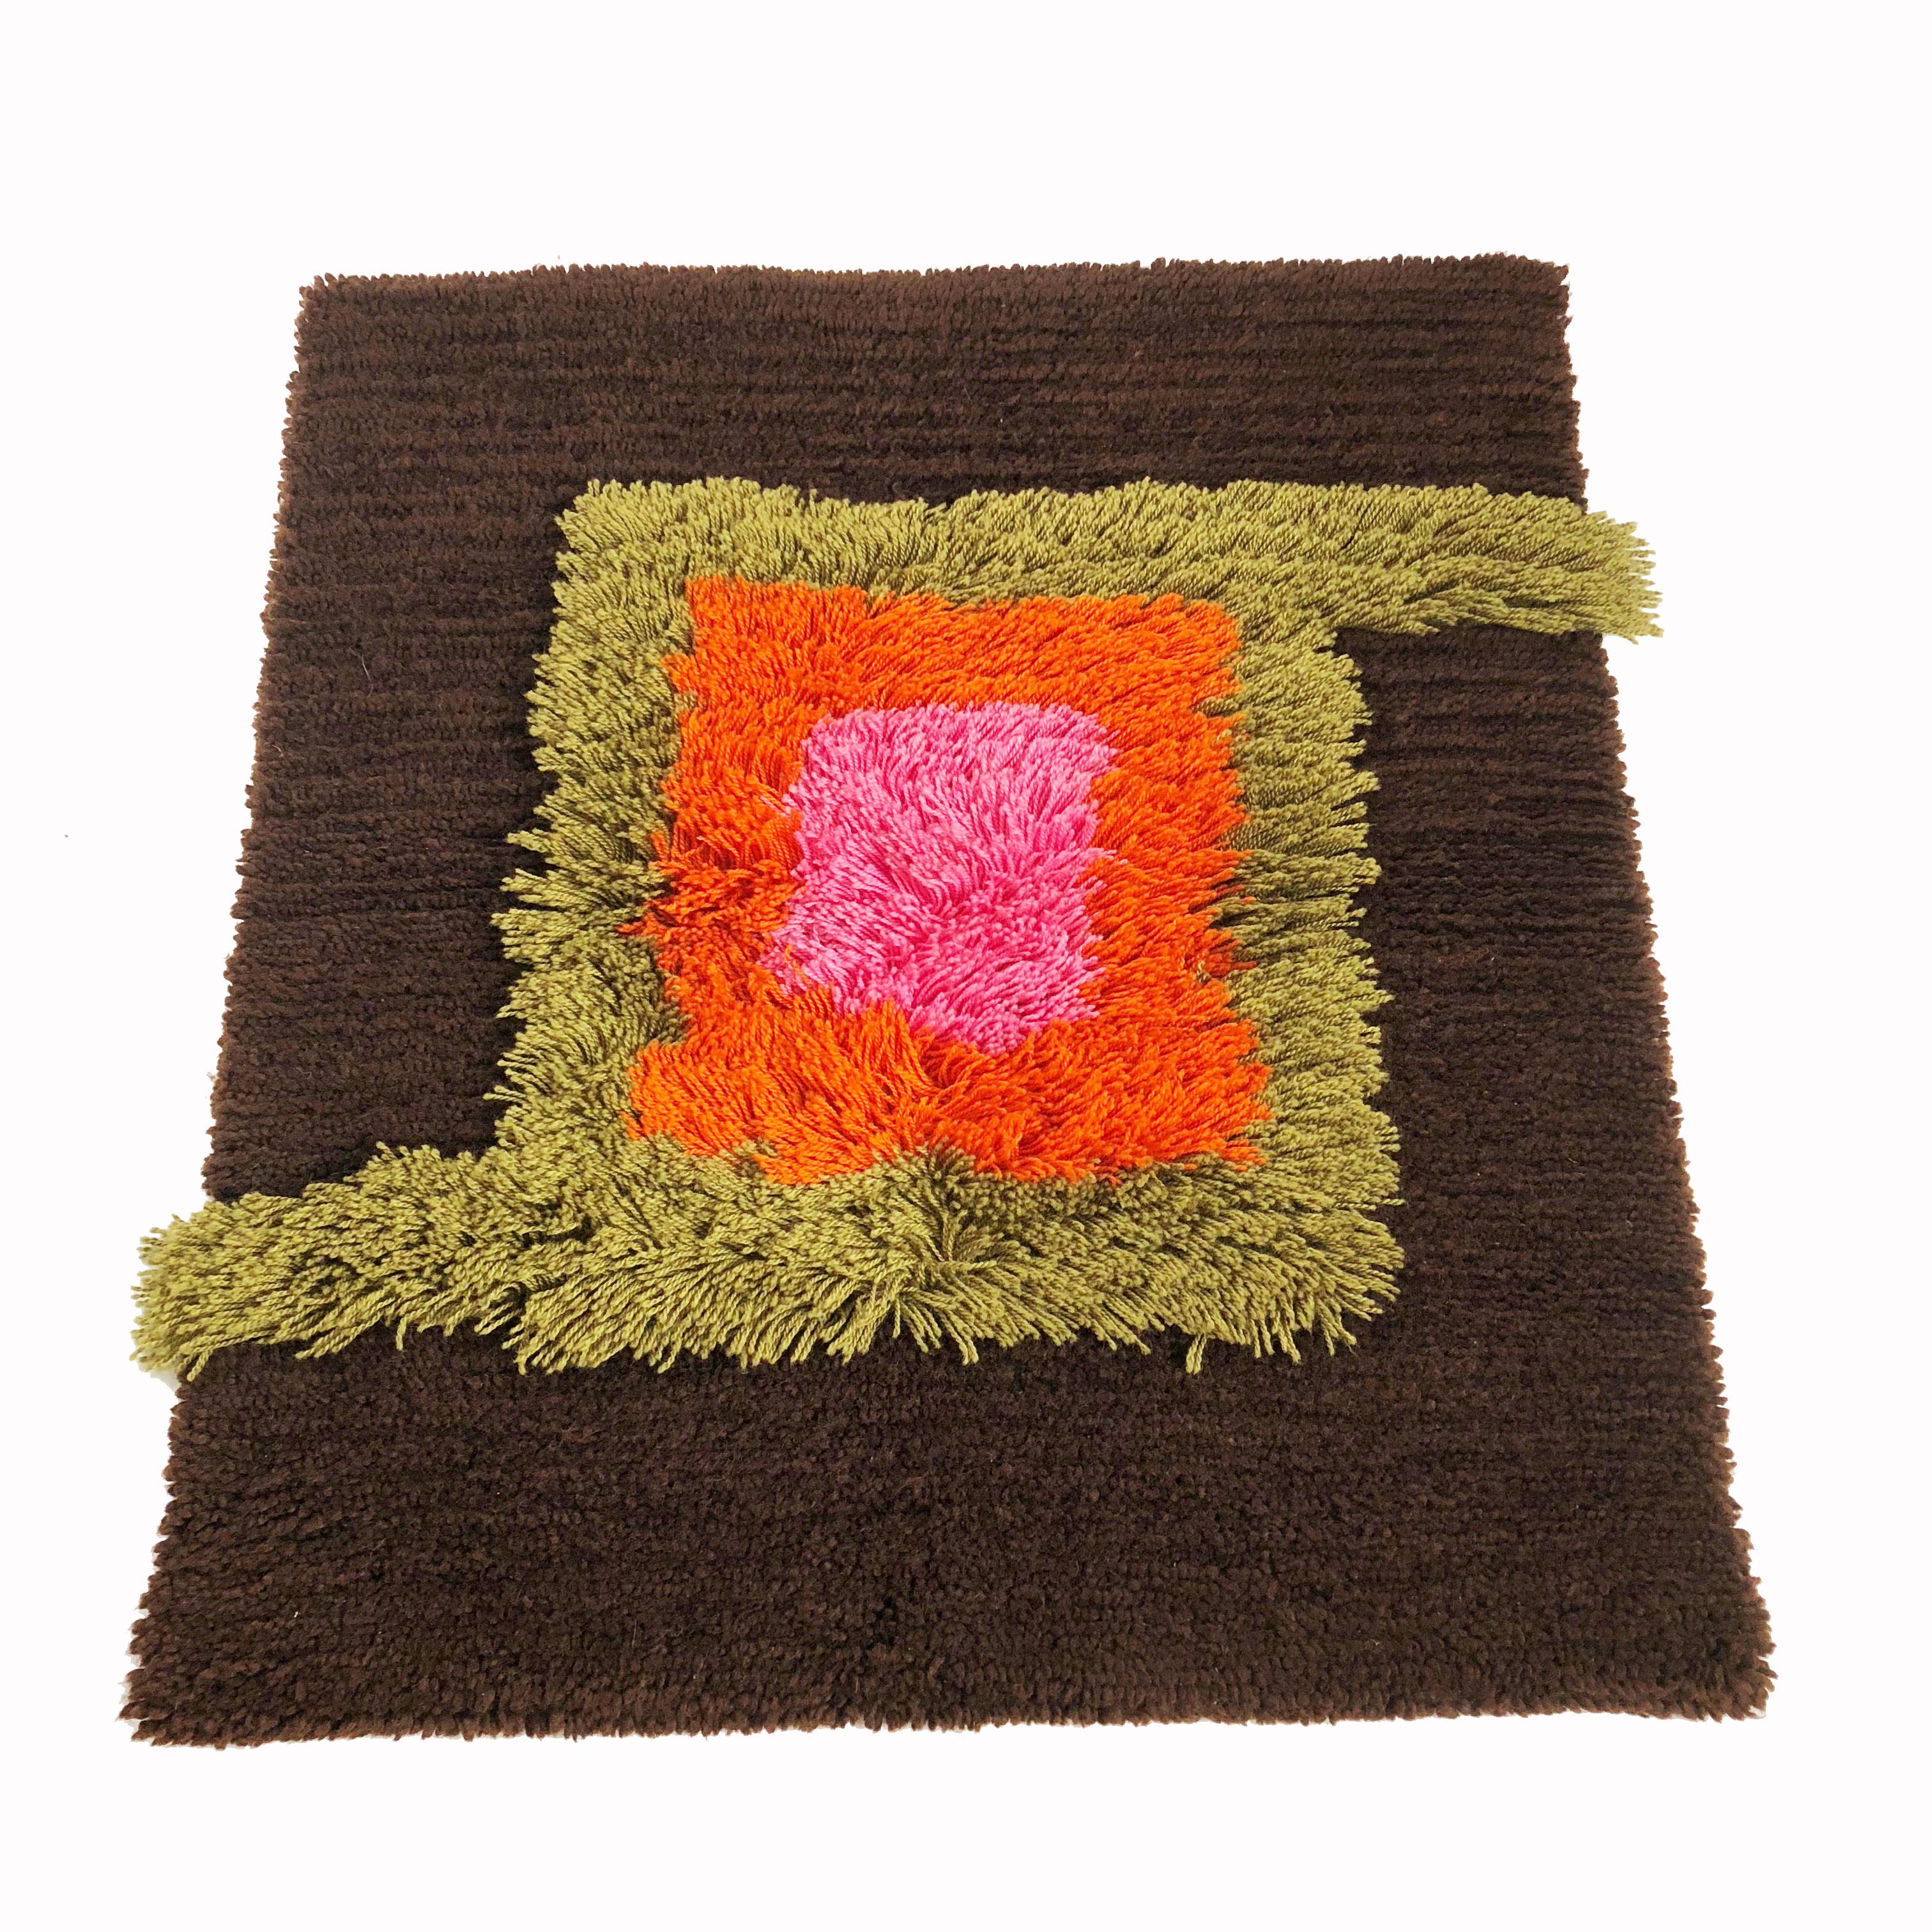 20th Century Modernist German Wall Rug by Cromwell Tefzet, Design by S. Doege, Germany, 1970s For Sale